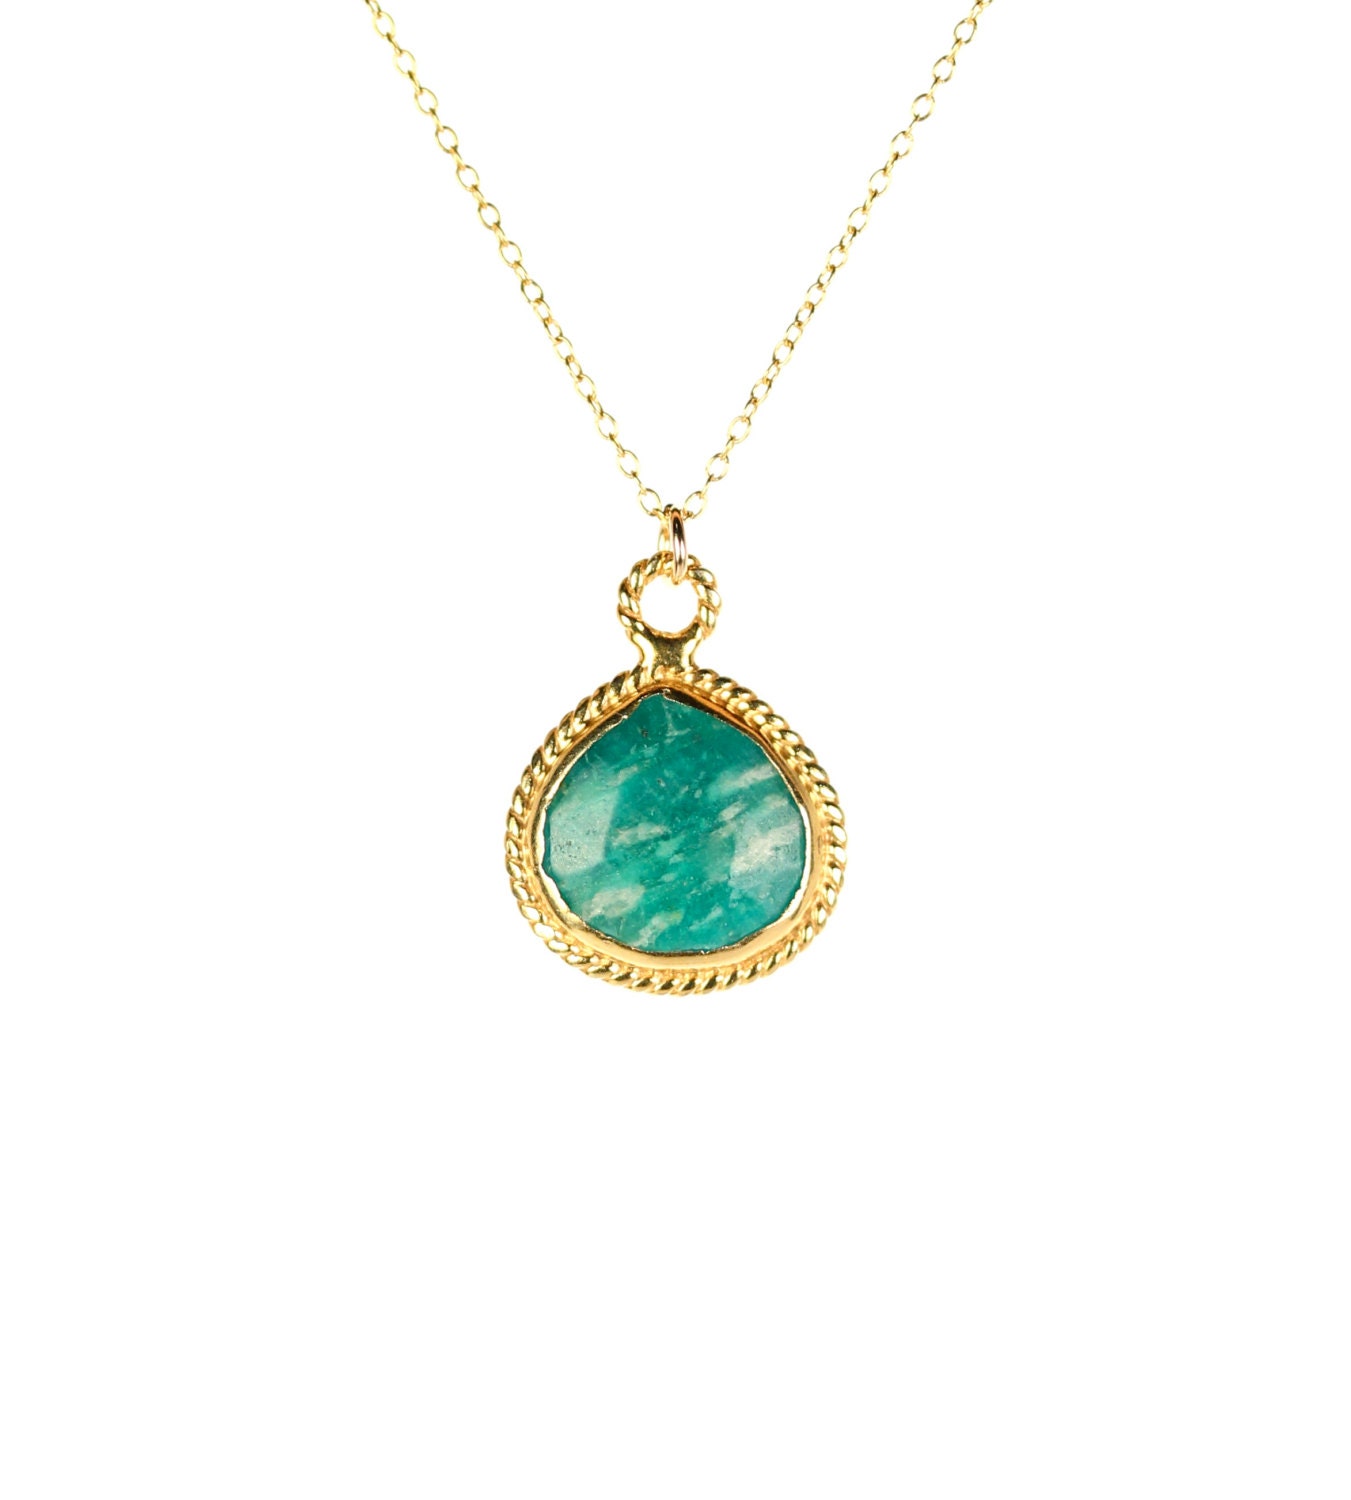 Amazonite necklace, green pendant necklace, gold teardrop necklace ...